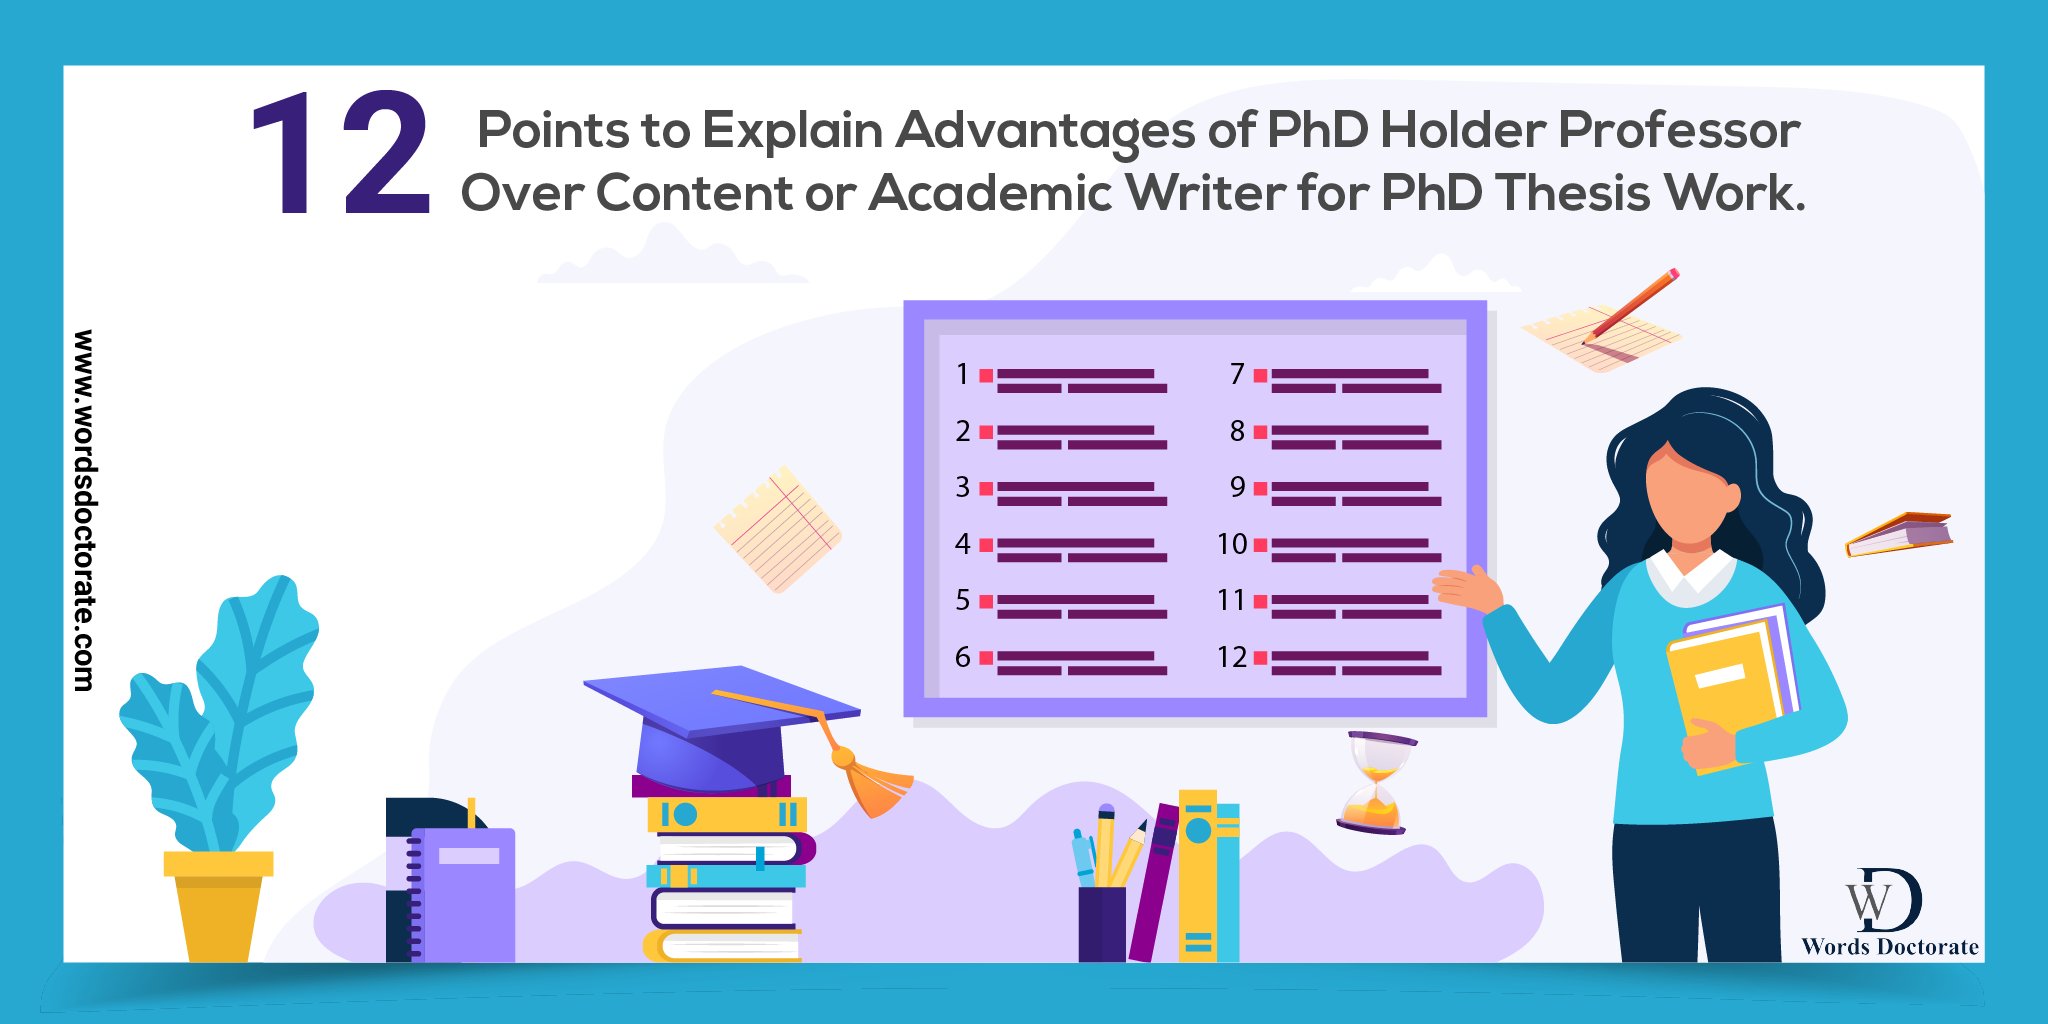 12 points to explain advantages of PhD holder professor over content or academic writer for PhD thesis work